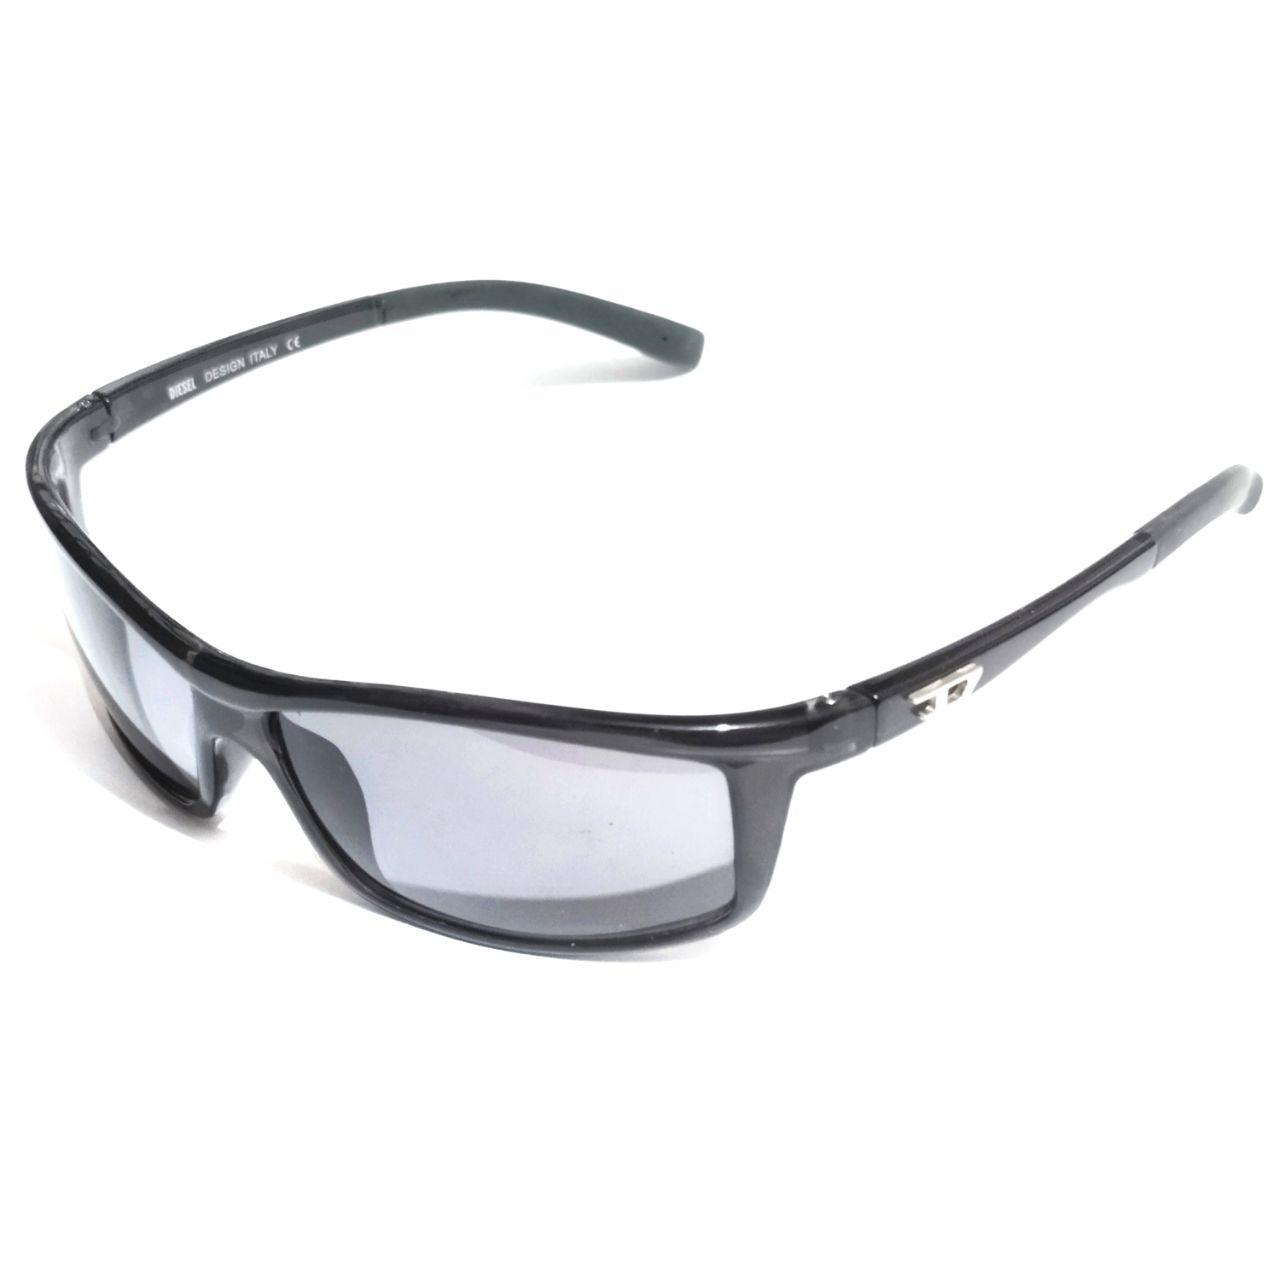 Slim Prescription Cycling Driving Glasses for Men and Women 6495